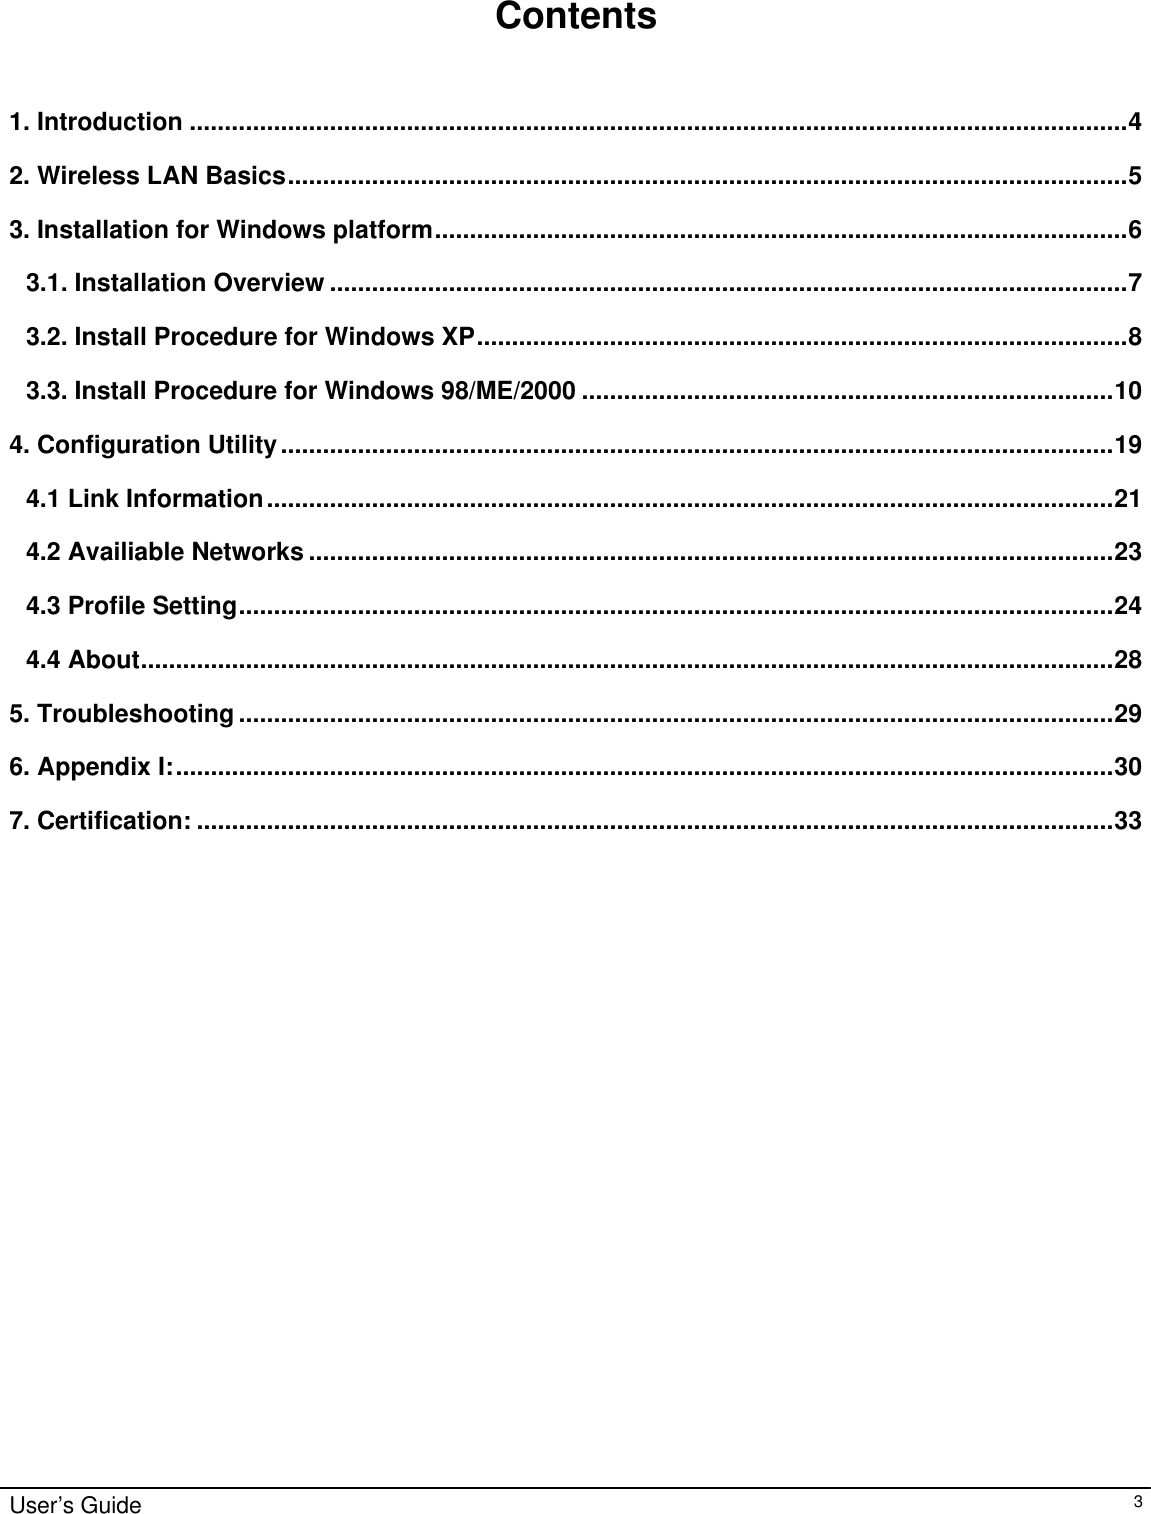                                                                                                                                                                                                                                                                                                                                        User’s Guide   3    Contents   1. Introduction ......................................................................................................................................4 2. Wireless LAN Basics........................................................................................................................5 3. Installation for Windows platform...................................................................................................6 3.1. Installation Overview ..................................................................................................................7 3.2. Install Procedure for Windows XP.............................................................................................8 3.3. Install Procedure for Windows 98/ME/2000 ............................................................................10 4. Configuration Utility.......................................................................................................................19 4.1 Link Information.........................................................................................................................21 4.2 Availiable Networks ...................................................................................................................23 4.3 Profile Setting.............................................................................................................................24 4.4 About...........................................................................................................................................28 5. Troubleshooting.............................................................................................................................29 6. Appendix I:......................................................................................................................................30 7. Certification: ...................................................................................................................................33                               